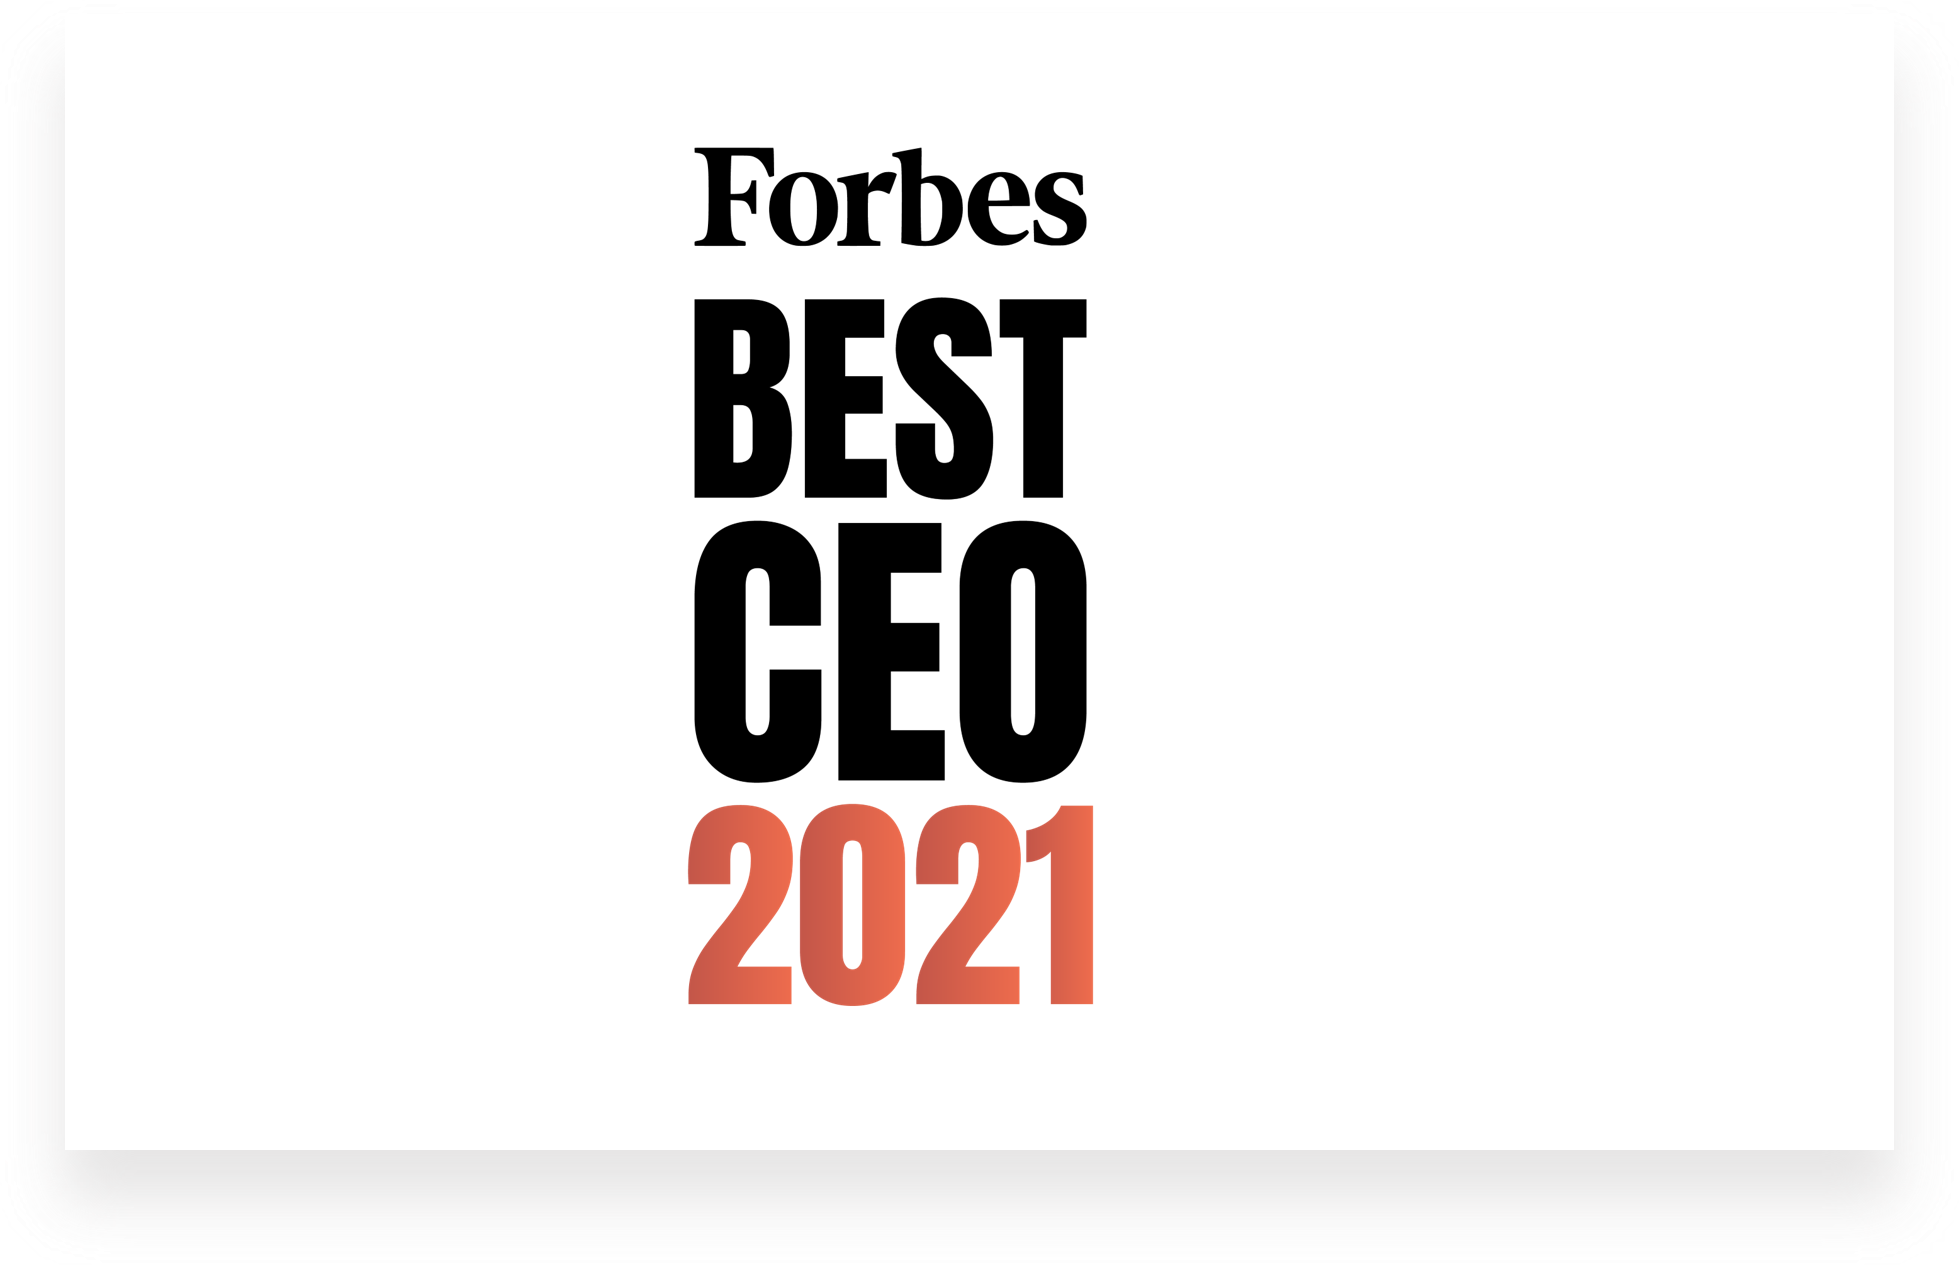 Forbes.png